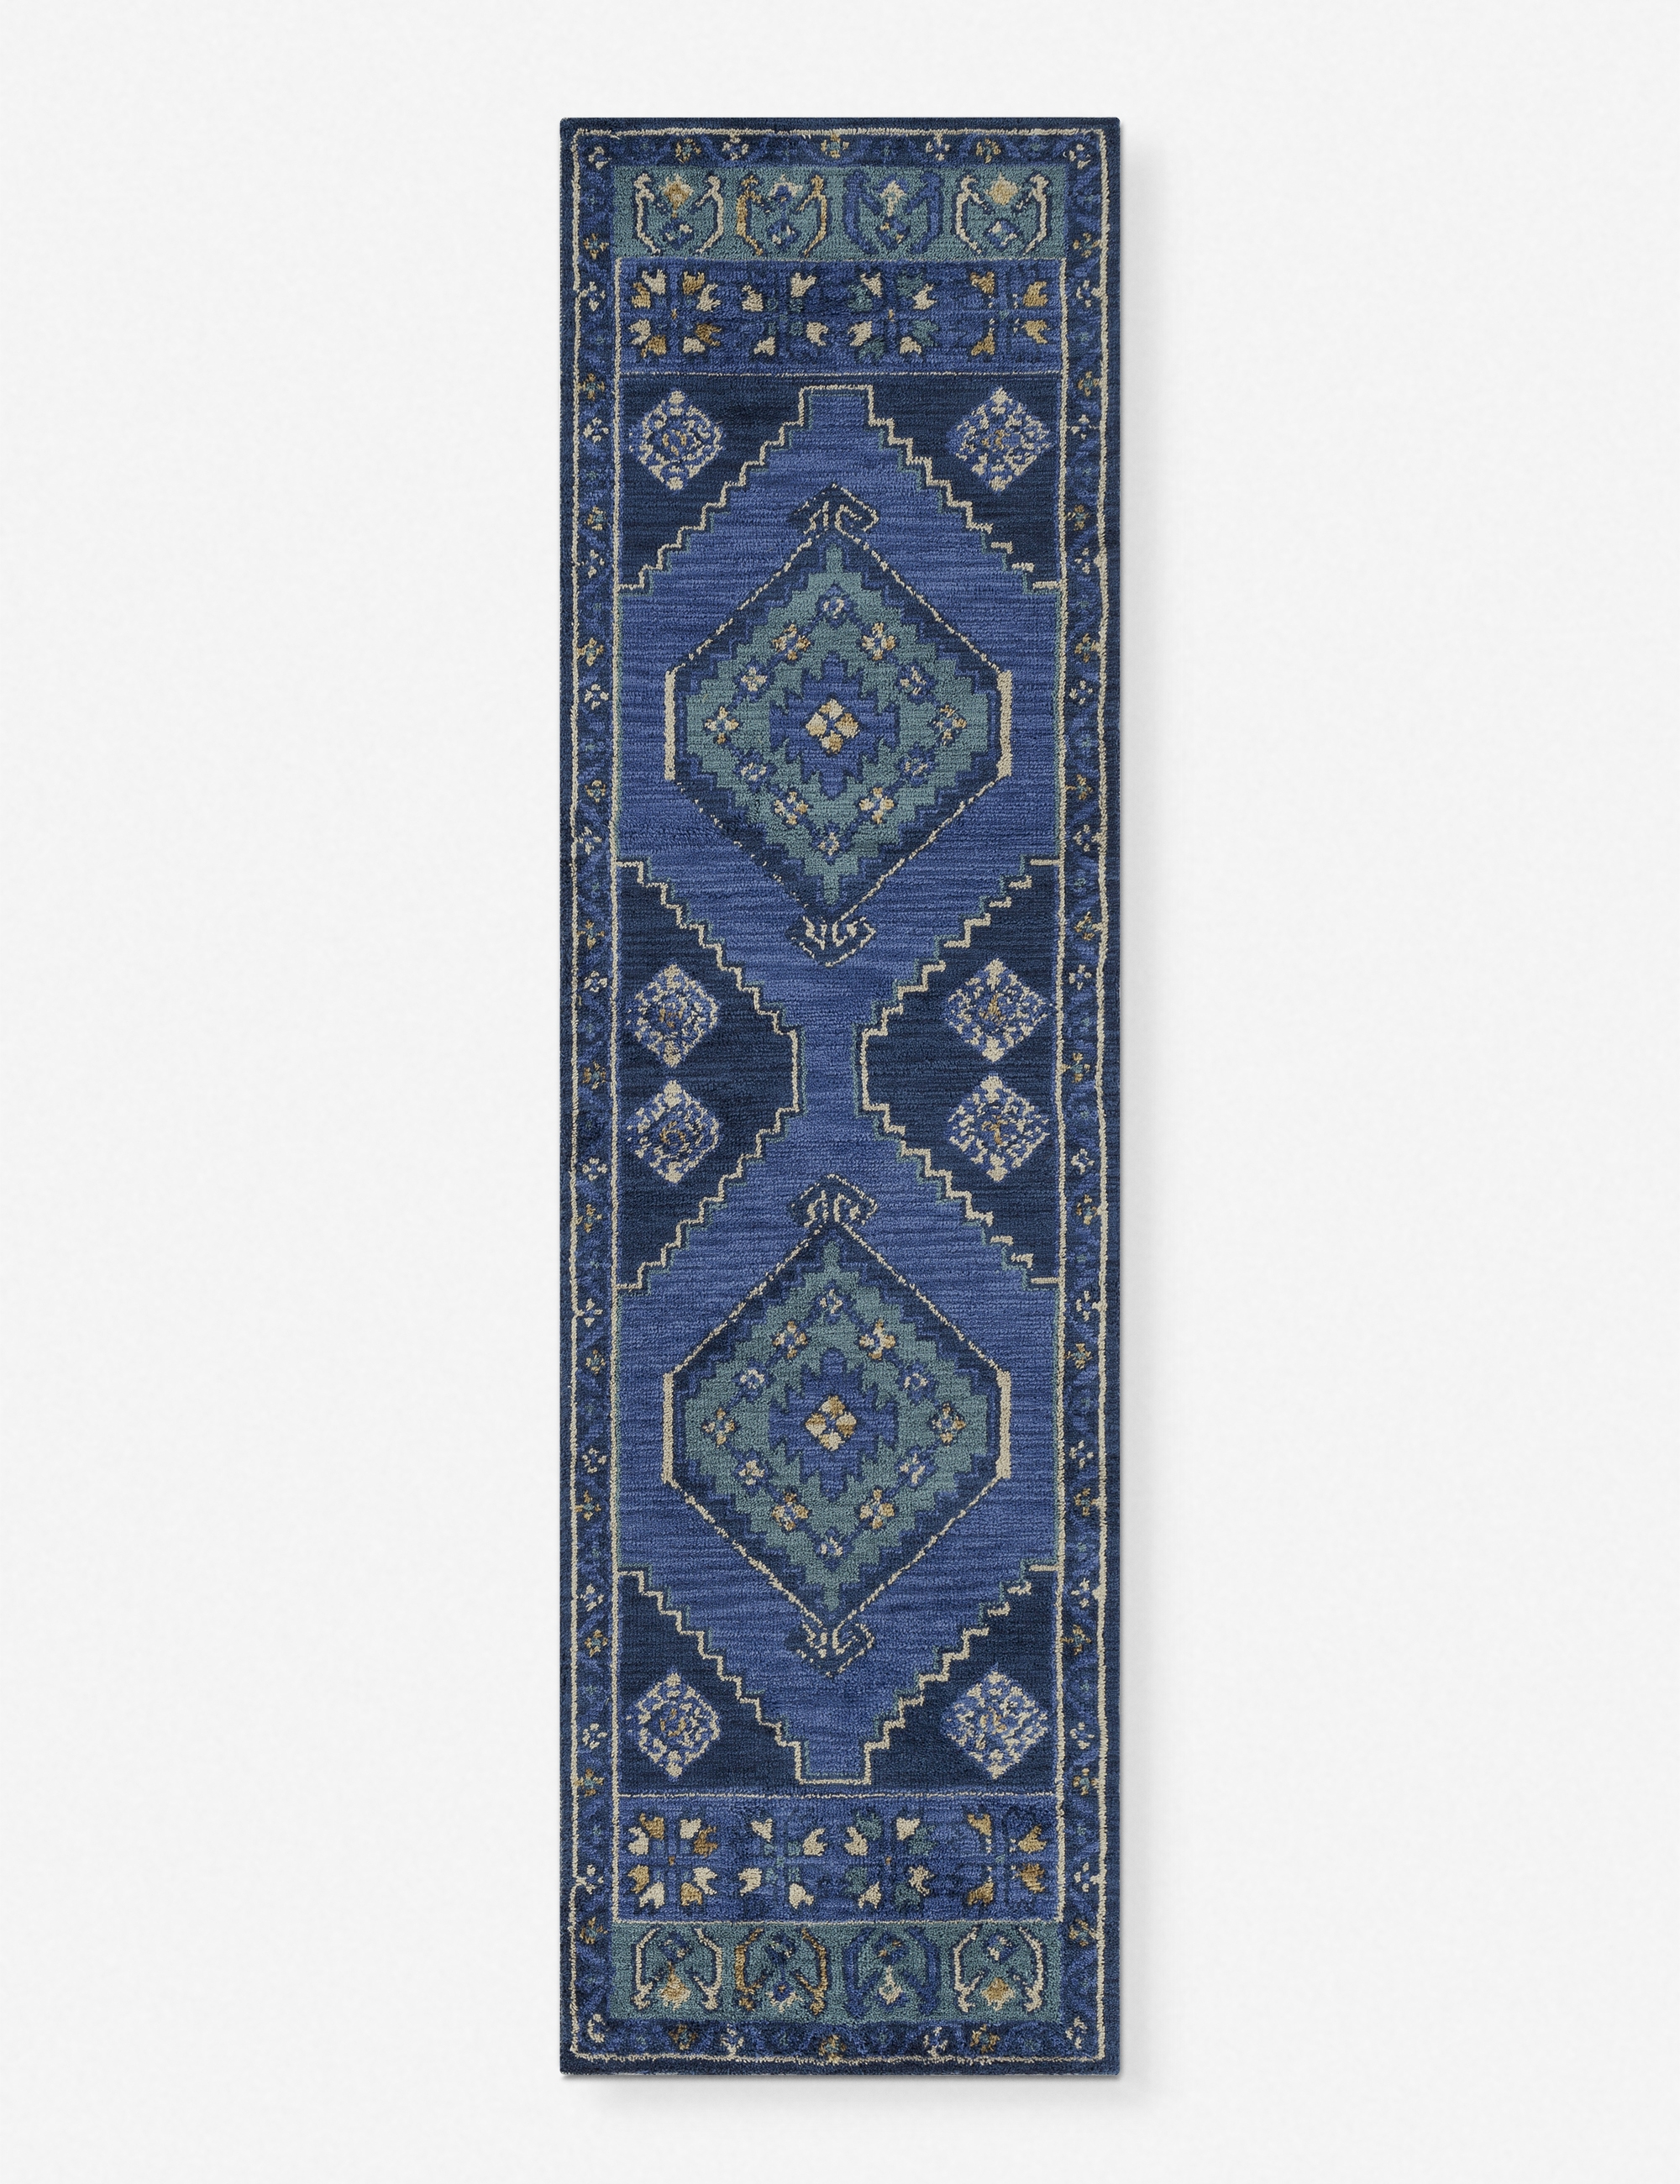 Jenica Rug, Navy and Teal 9' x 12' - Image 2